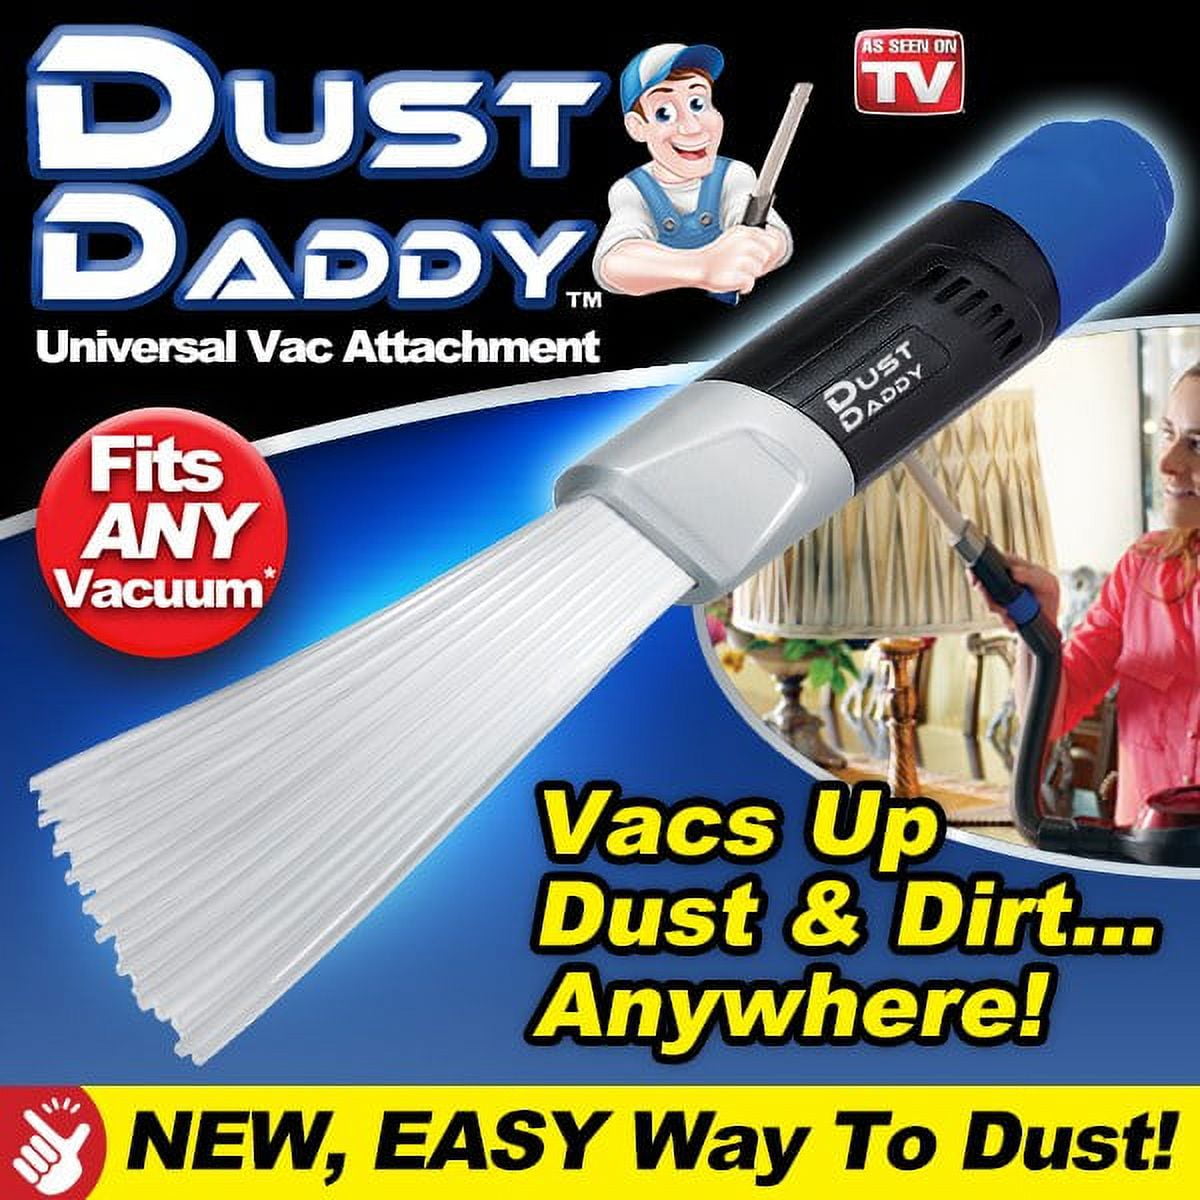 TV Vacuum Attachment Dust Daddy As Seen on Free Shipping New 735541912252